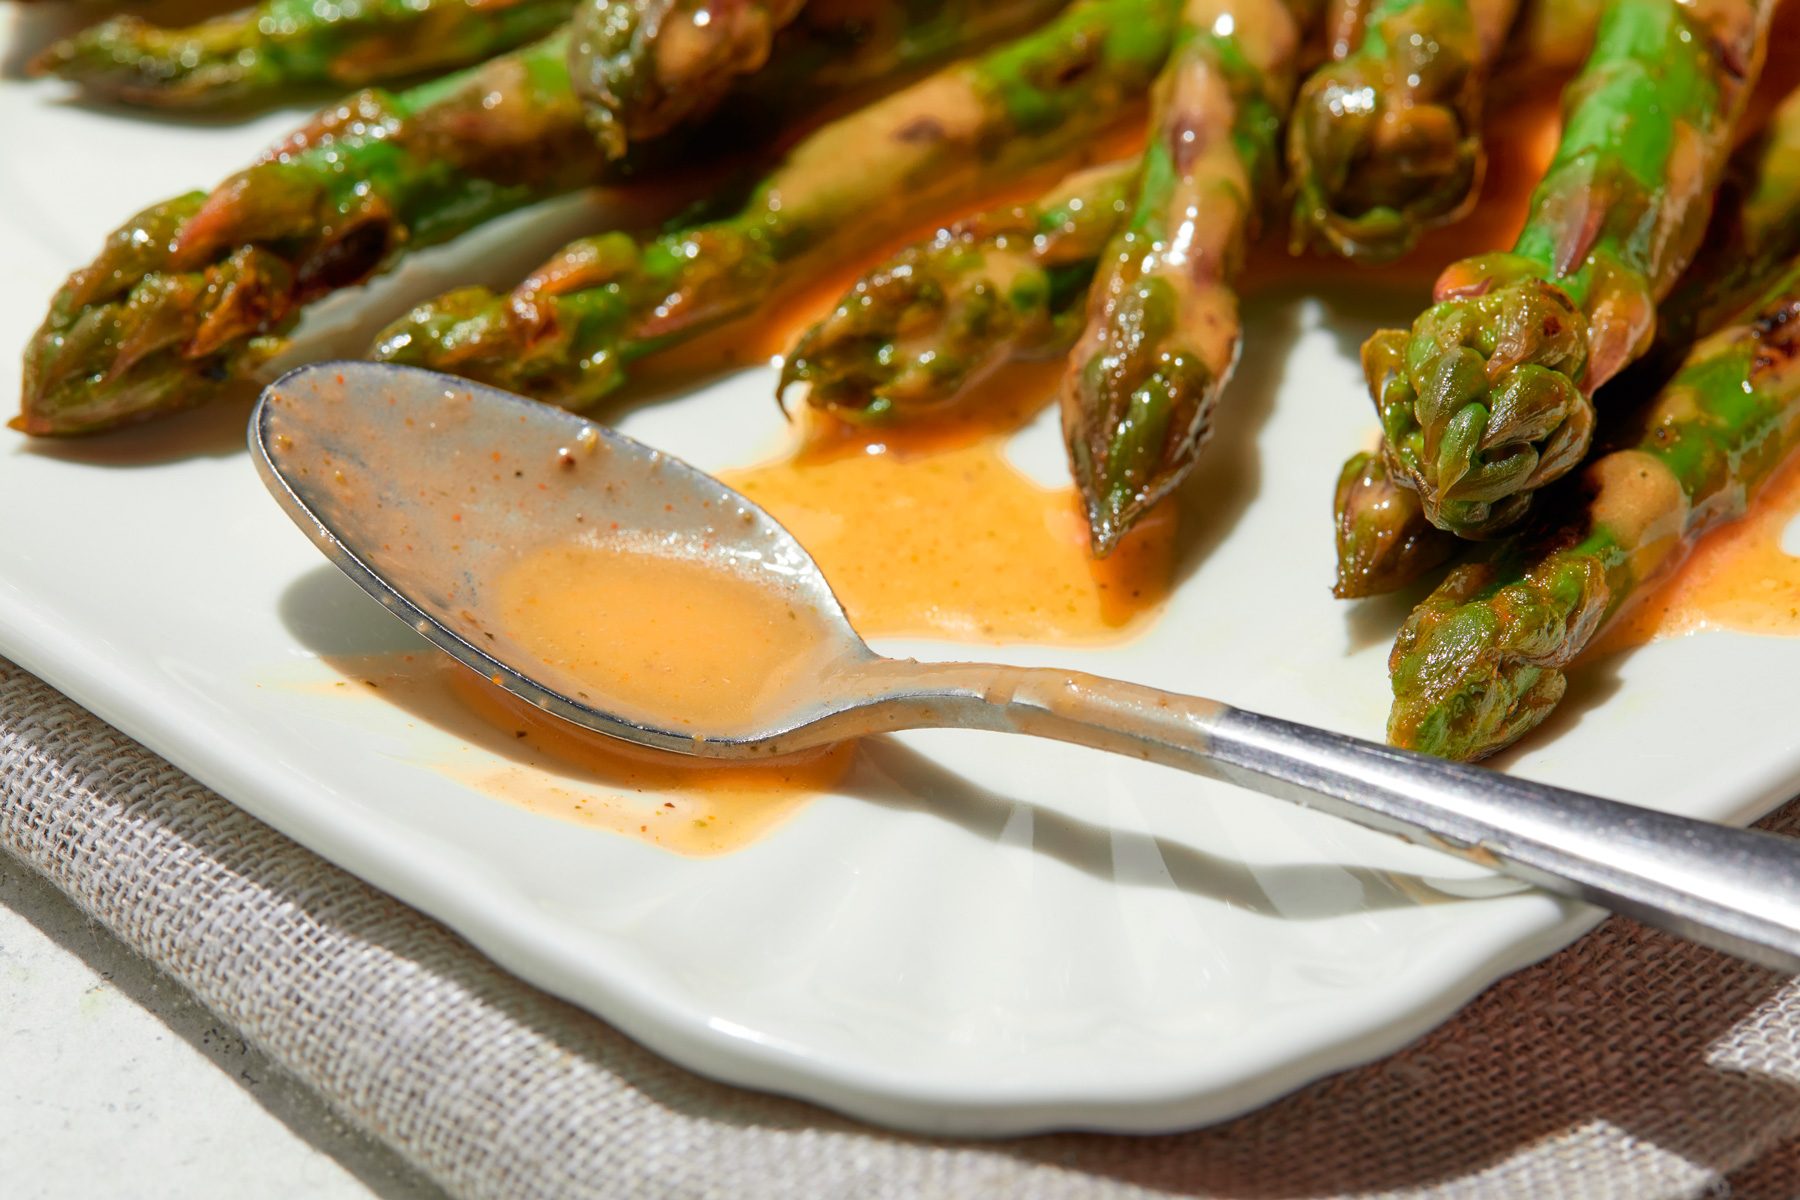 A plate of asparagus with Italian Dressing drizzled on top